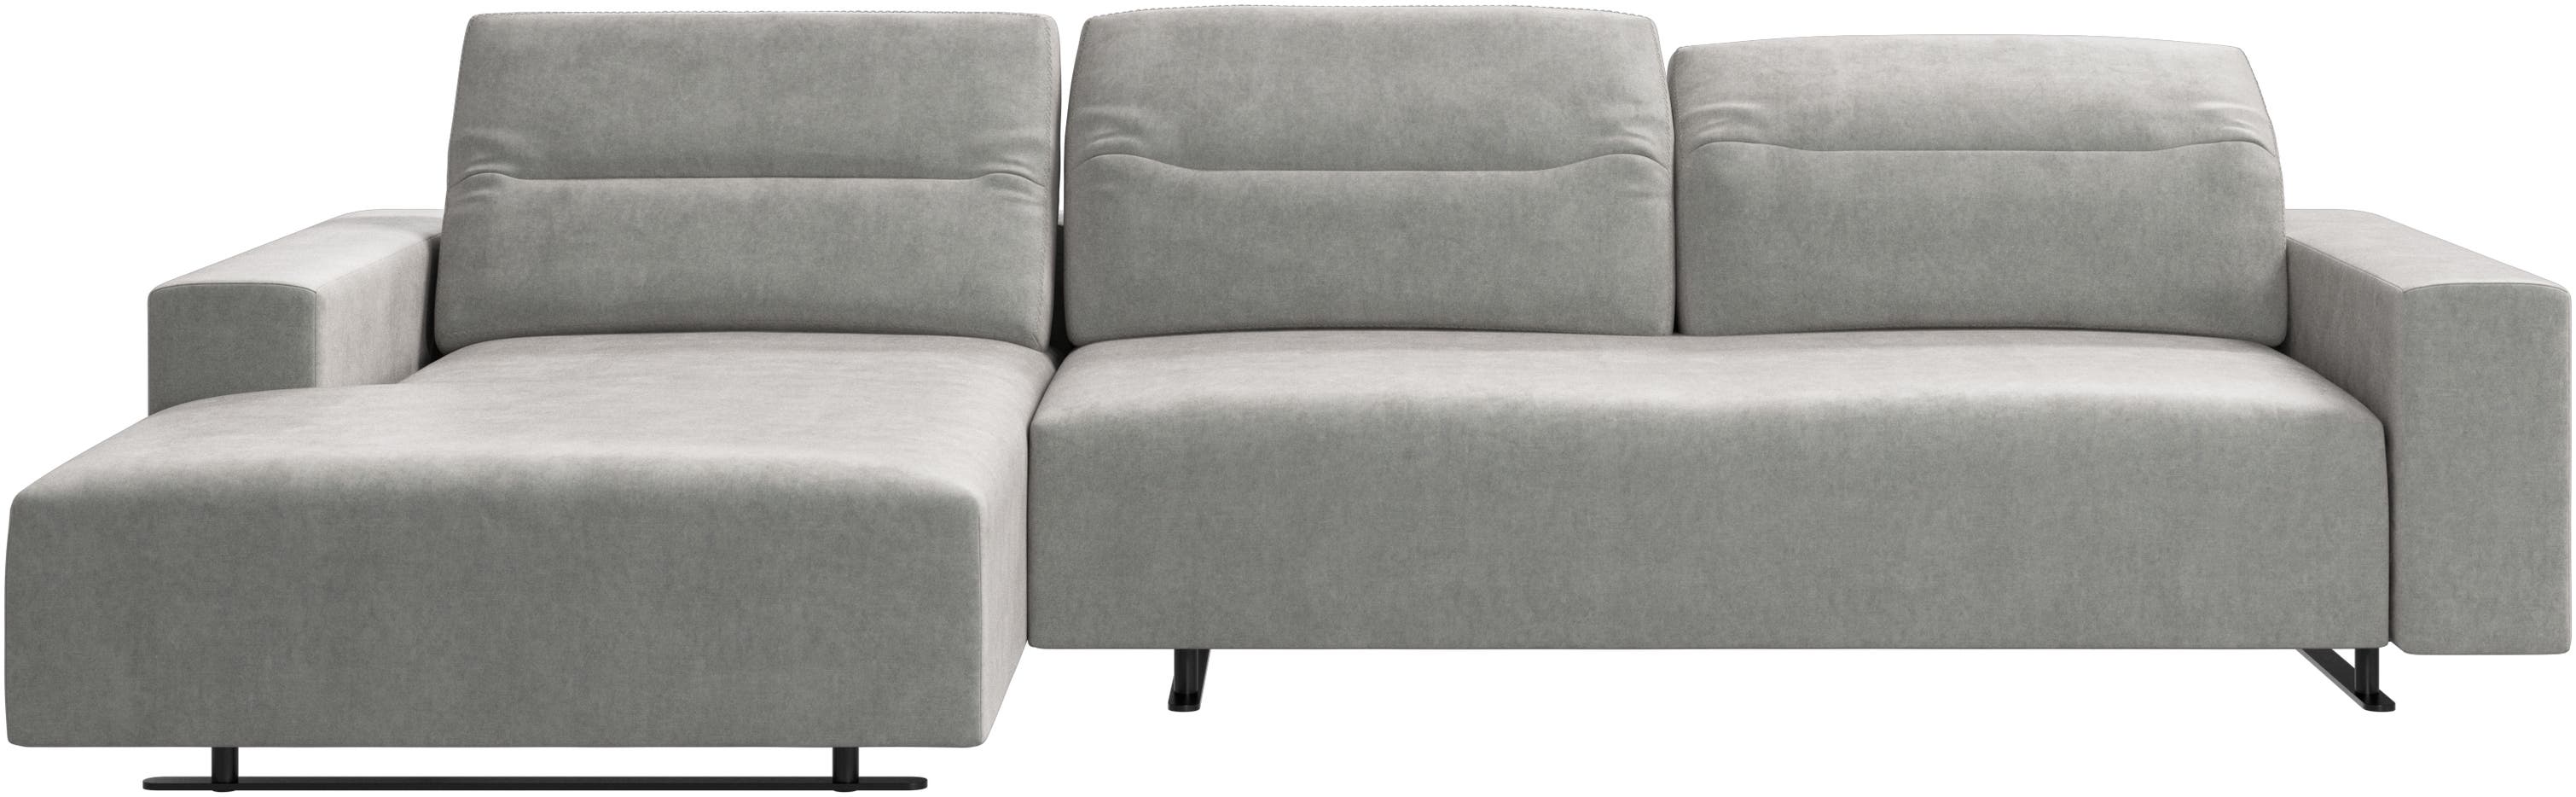 Hampton sofa with adjustable back and resting unit left side